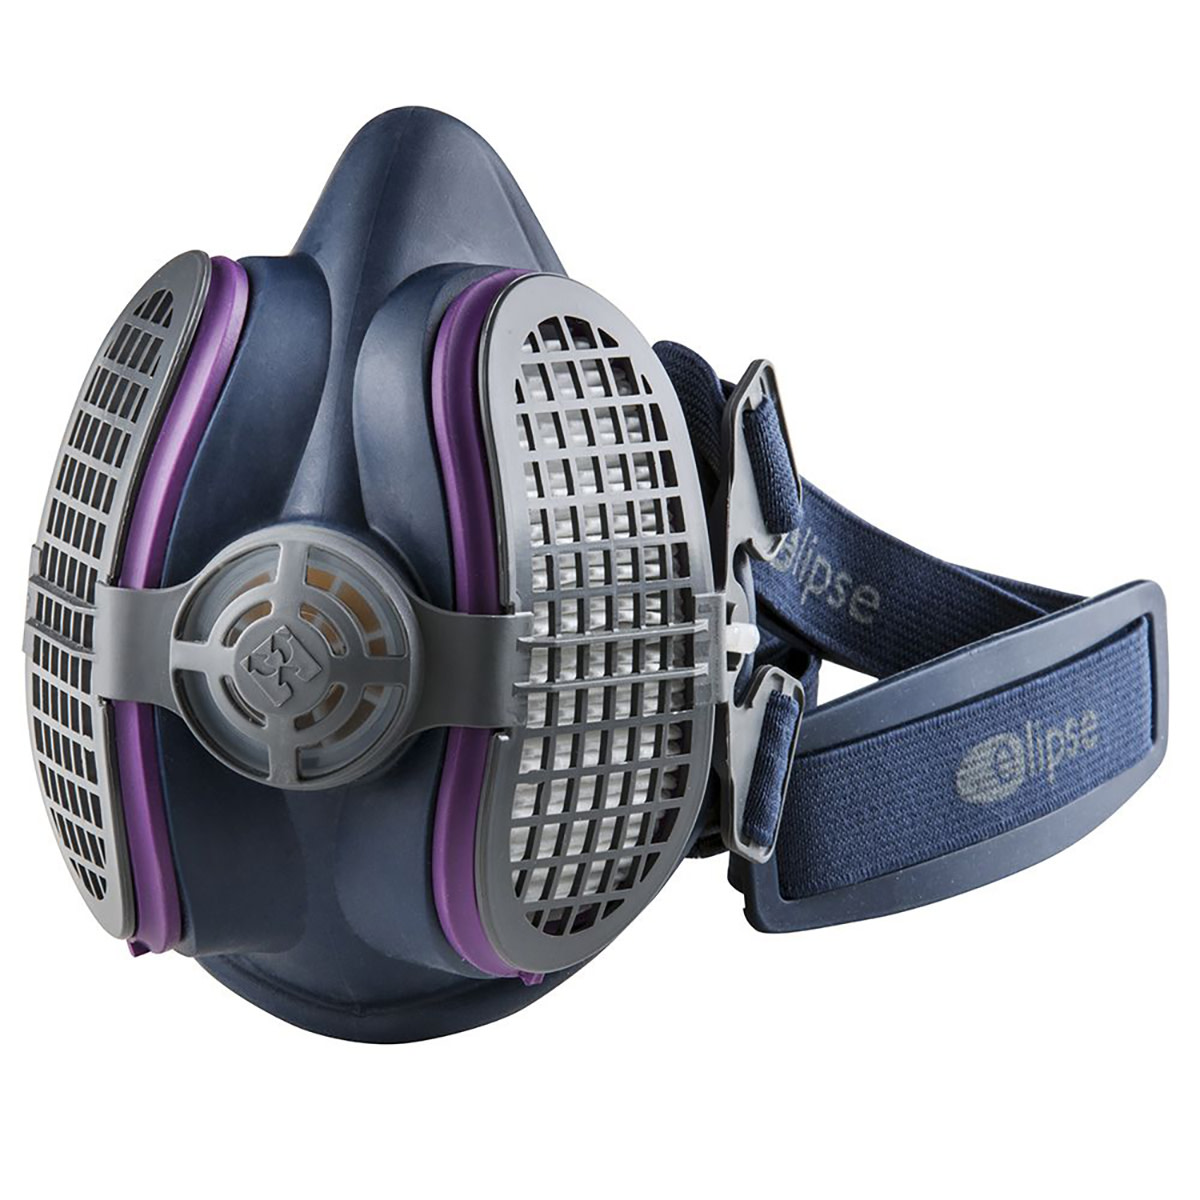 The GVS Elipse P100 half-mask respirator from Rockler Woodworking & Hardware.